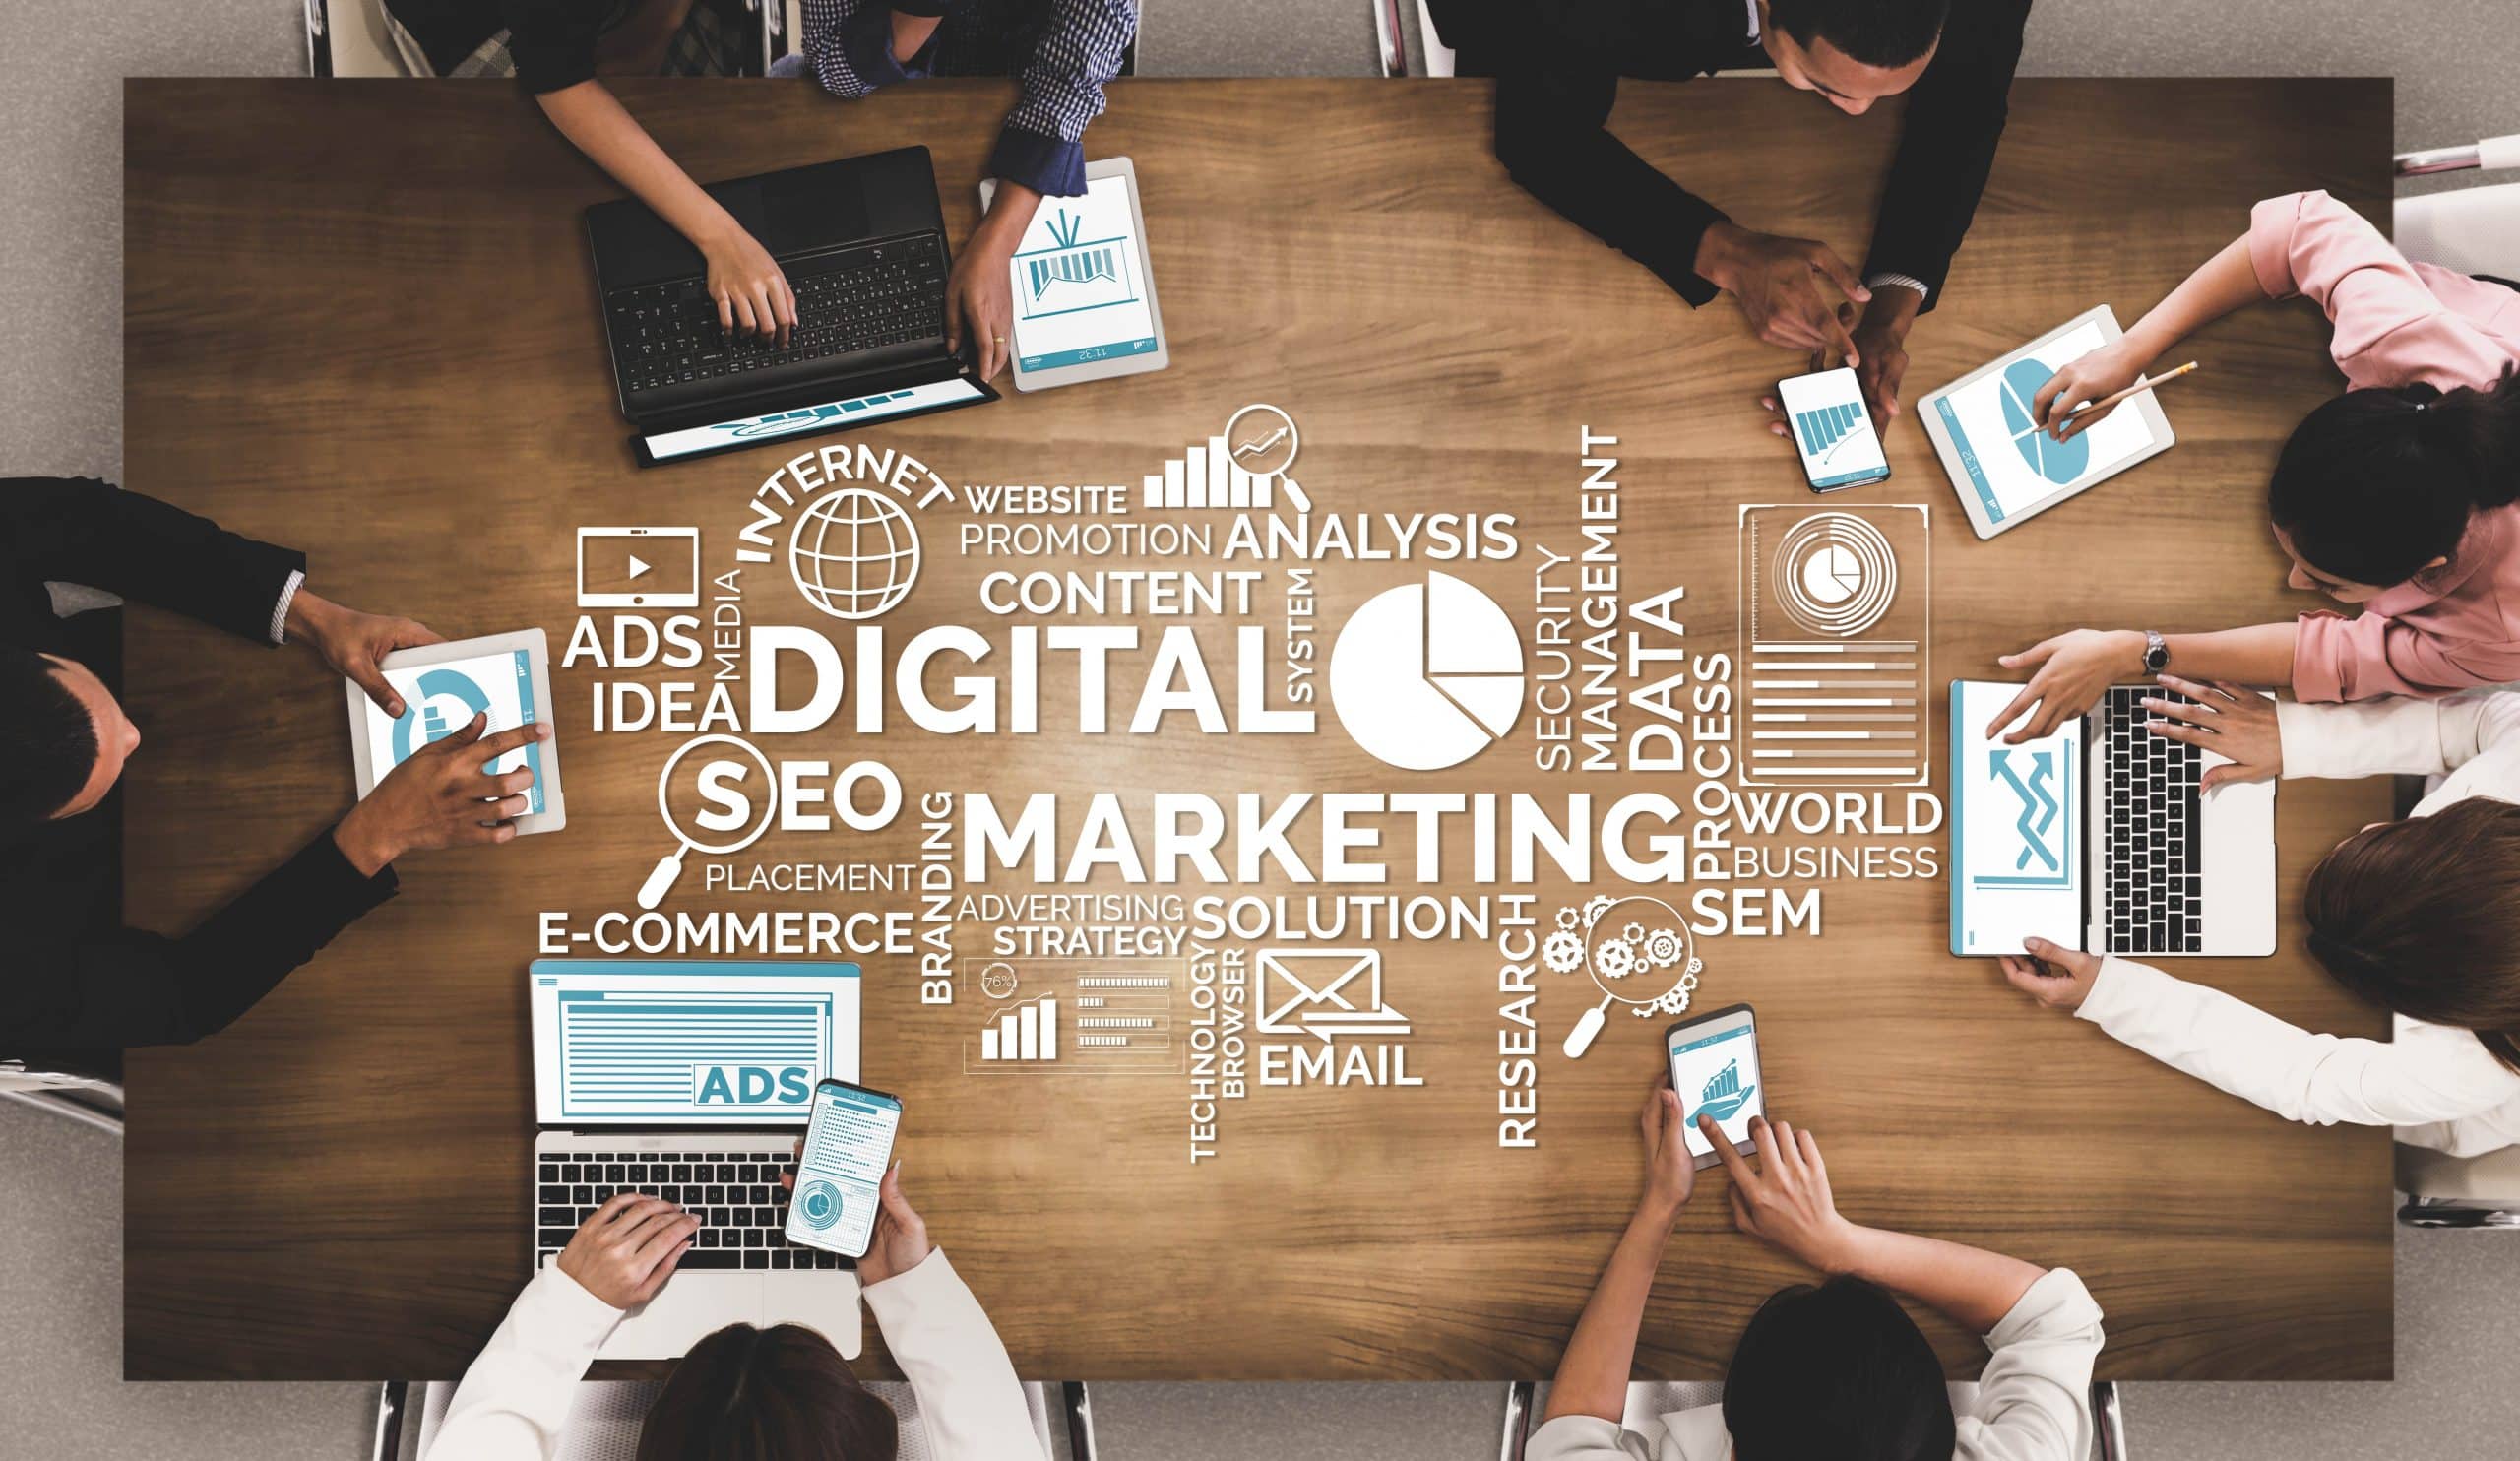 What digital marketing techniques should you employ in 2021?